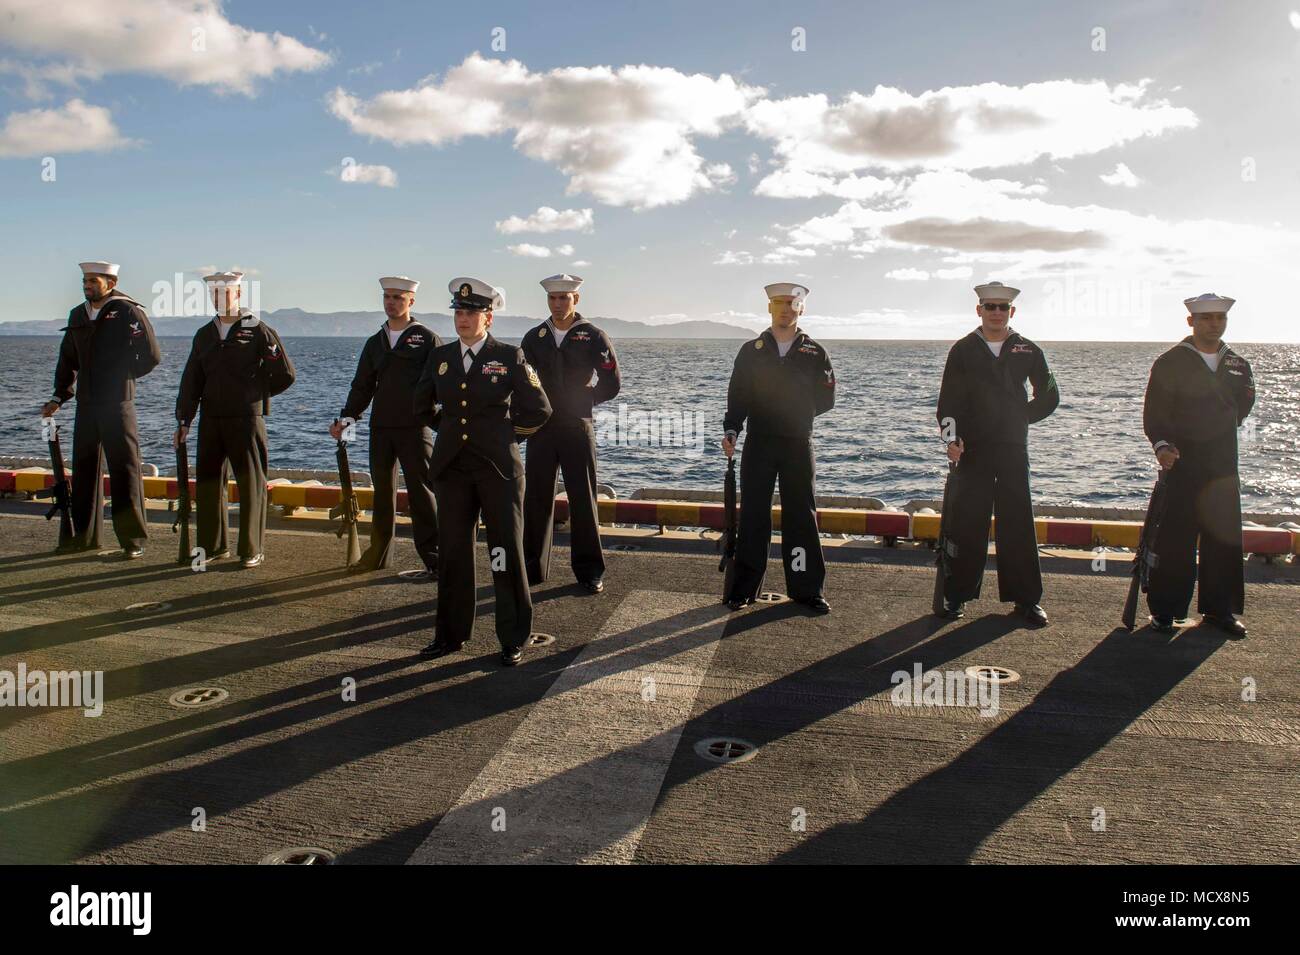 180304-N-ZS023-001 PACIFIC OCEAN (March 4, 2018) Sailors aboard the amphibious assault ship USS America (LHA 6), participate in a burial-at-sea ceremony on the ship’s starboard elevator. America is underway off the coast of southern California preparing for an ammunitions offload prior to entering a planned maintenance availability period. (U.S. Navy photo by Mass Communication Specialist 3rd Class Vance Hand/Released) Stock Photo